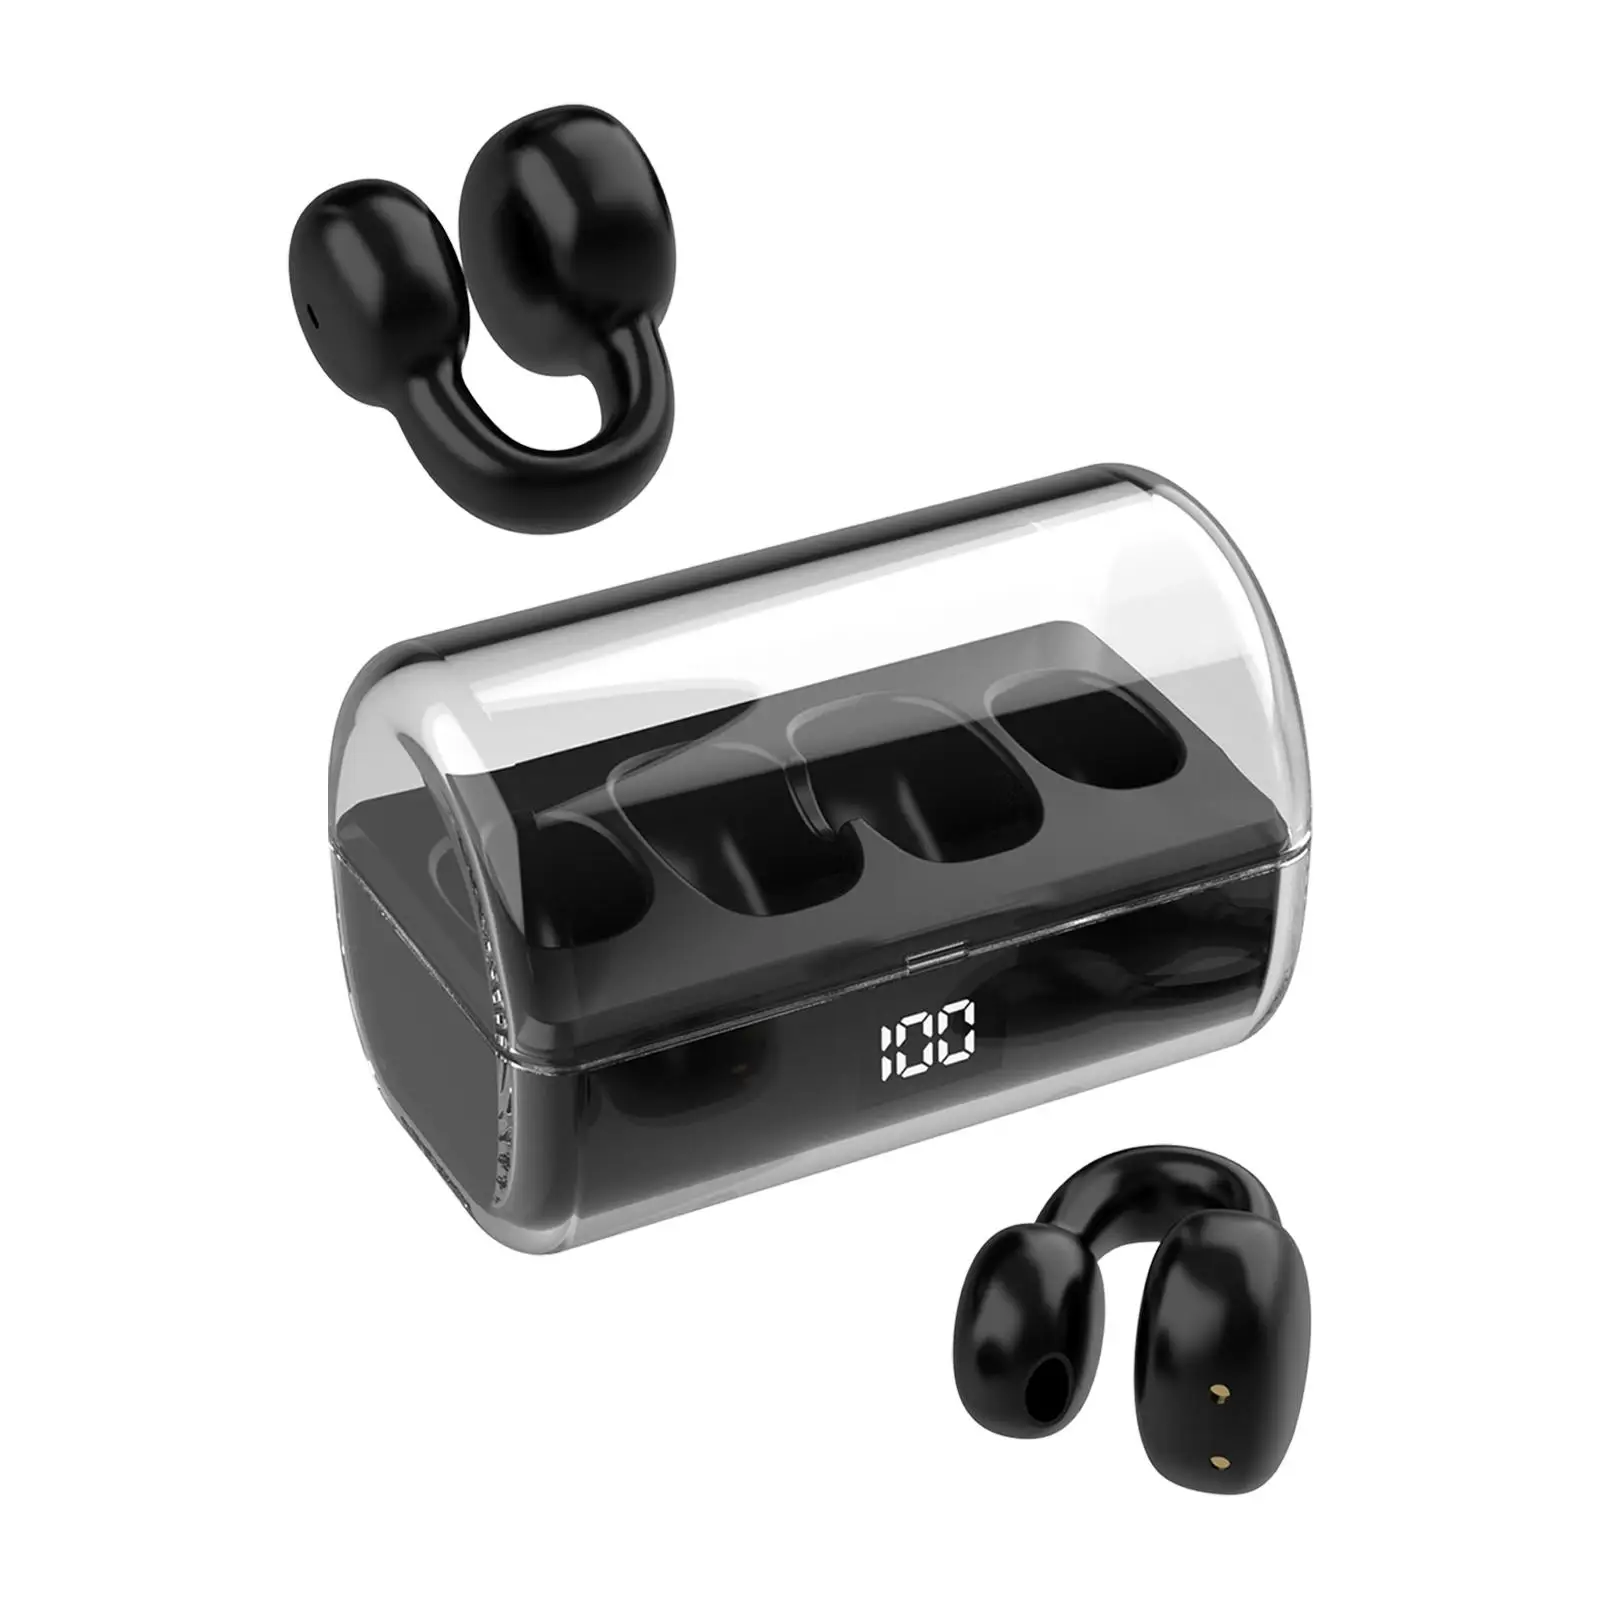 Wireless Ear Clip Headphones Rechargeable Low Latency HiFi Sound Clip on Earbuds Business Earphones for Running Workout Driving